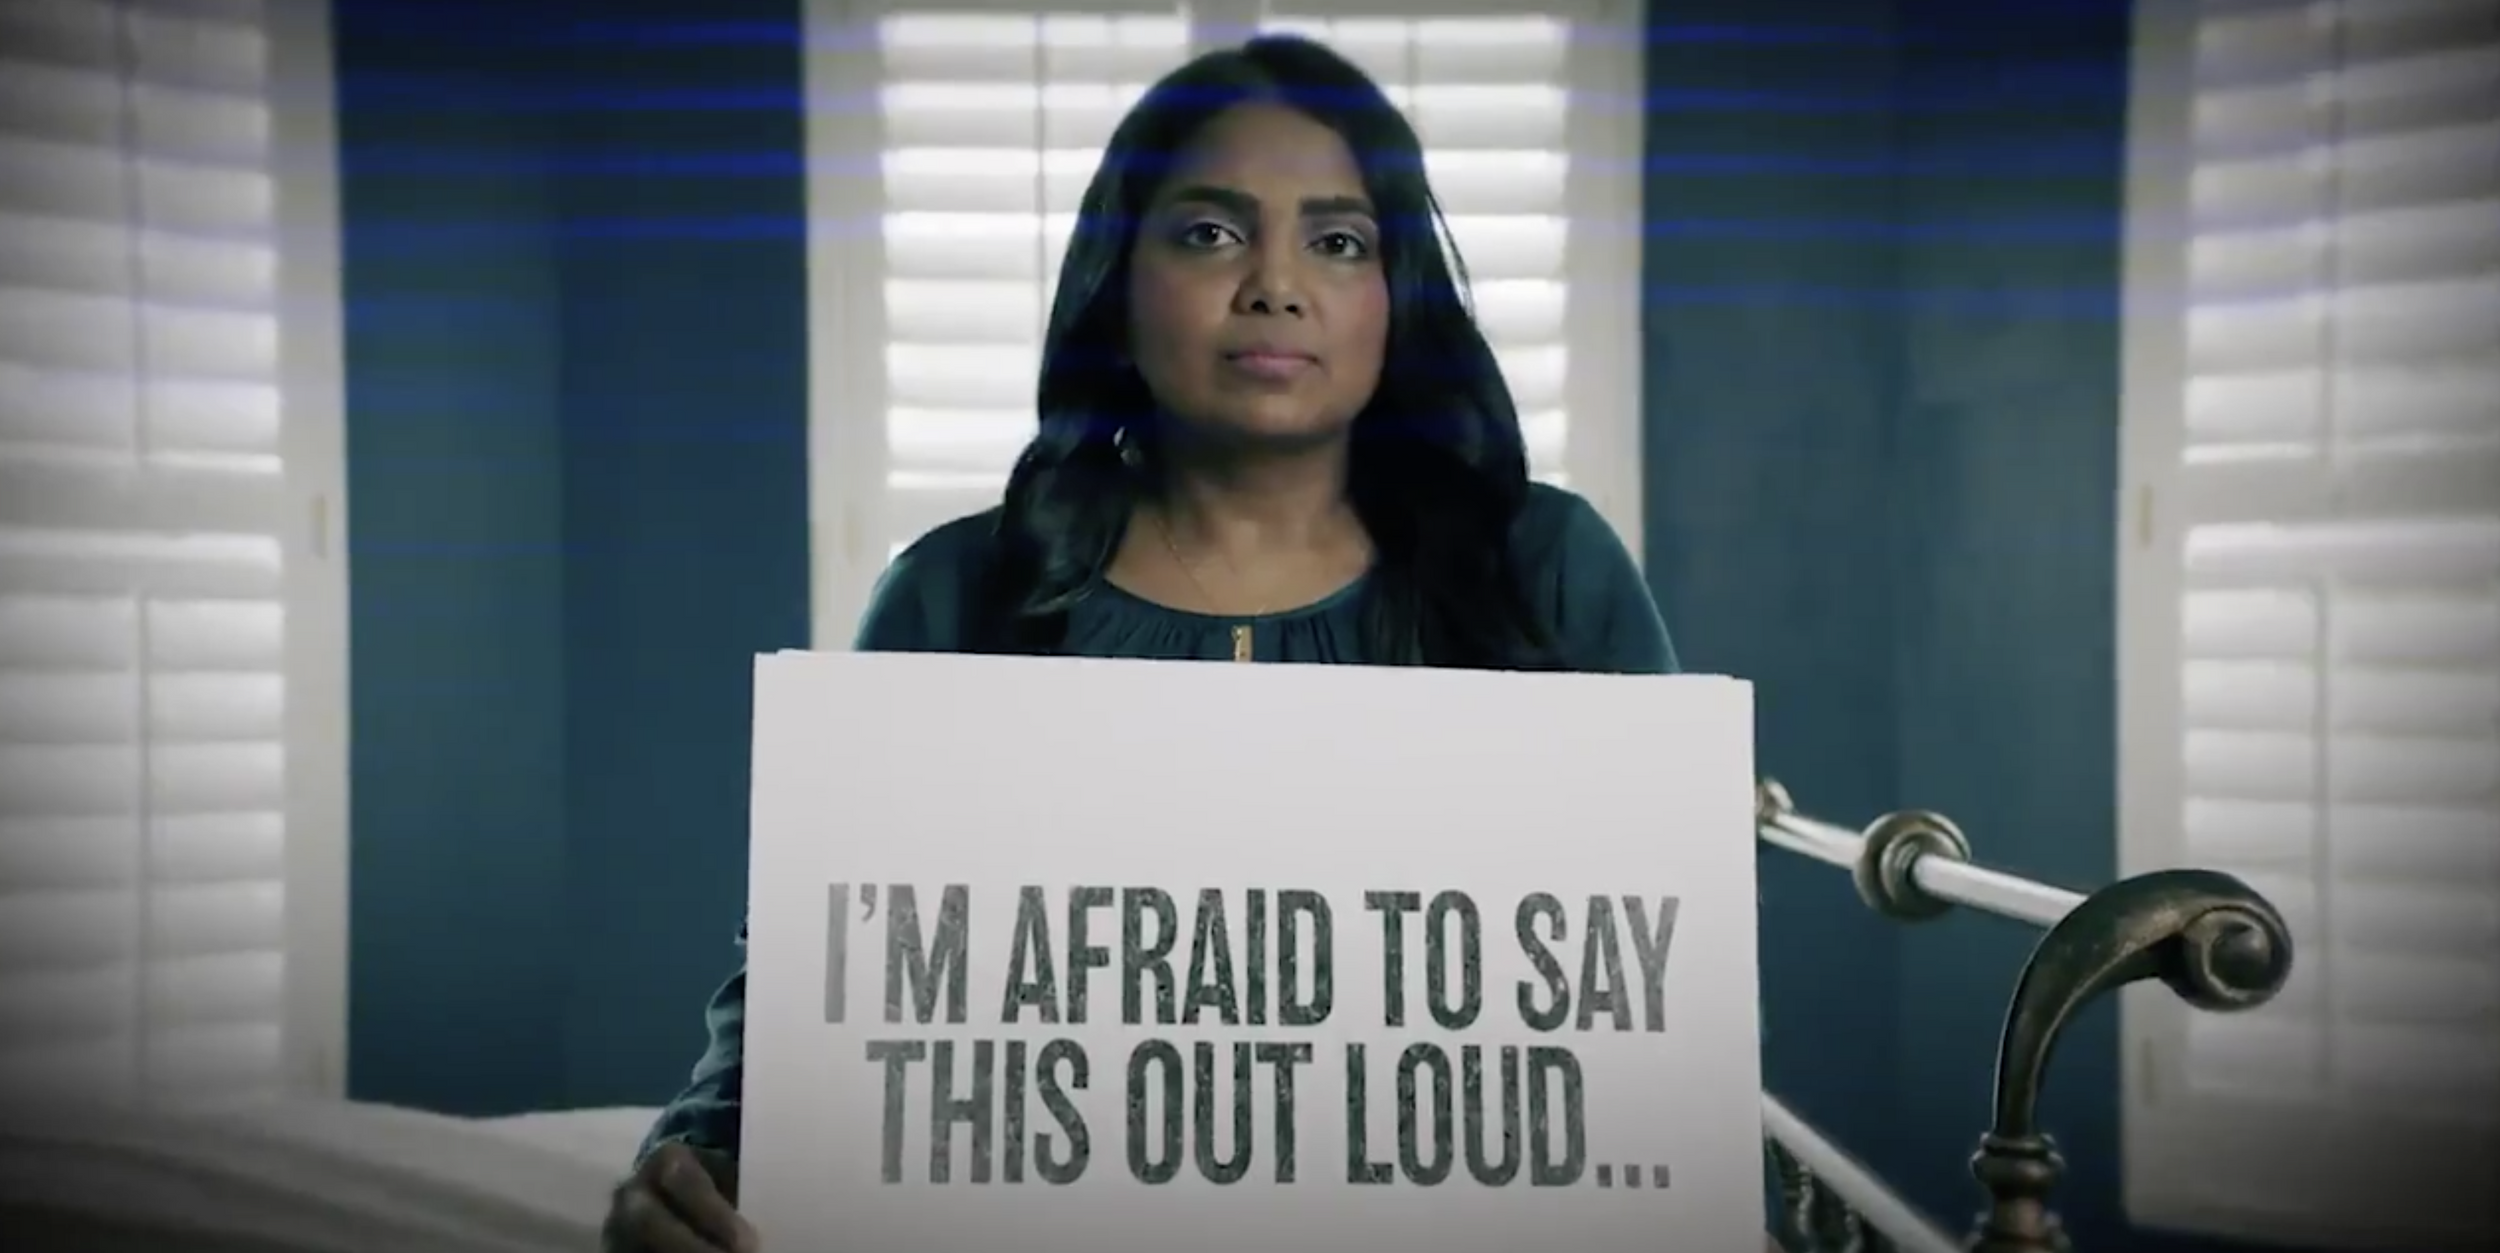 GOP Anti-Trump Group Just Gave This Trump Ad a Savage New Makeover and Now It's a Perfect Ad for Biden